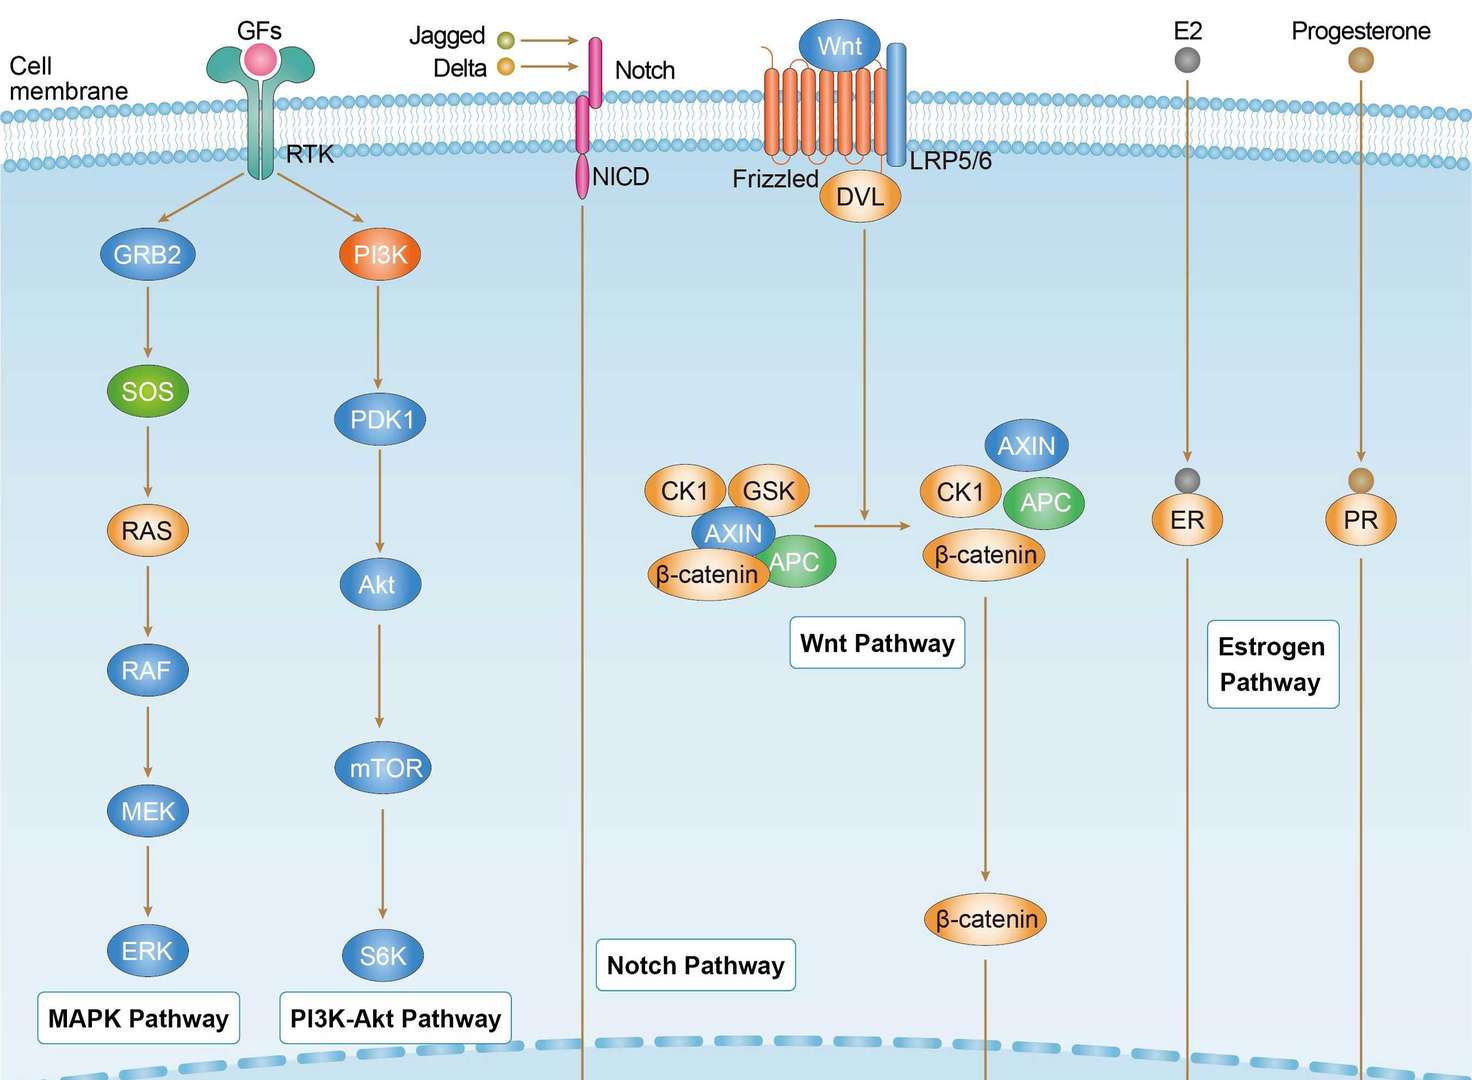 Breast Cancer Overview - Pathways, Diagnosis, Targeted Therapies